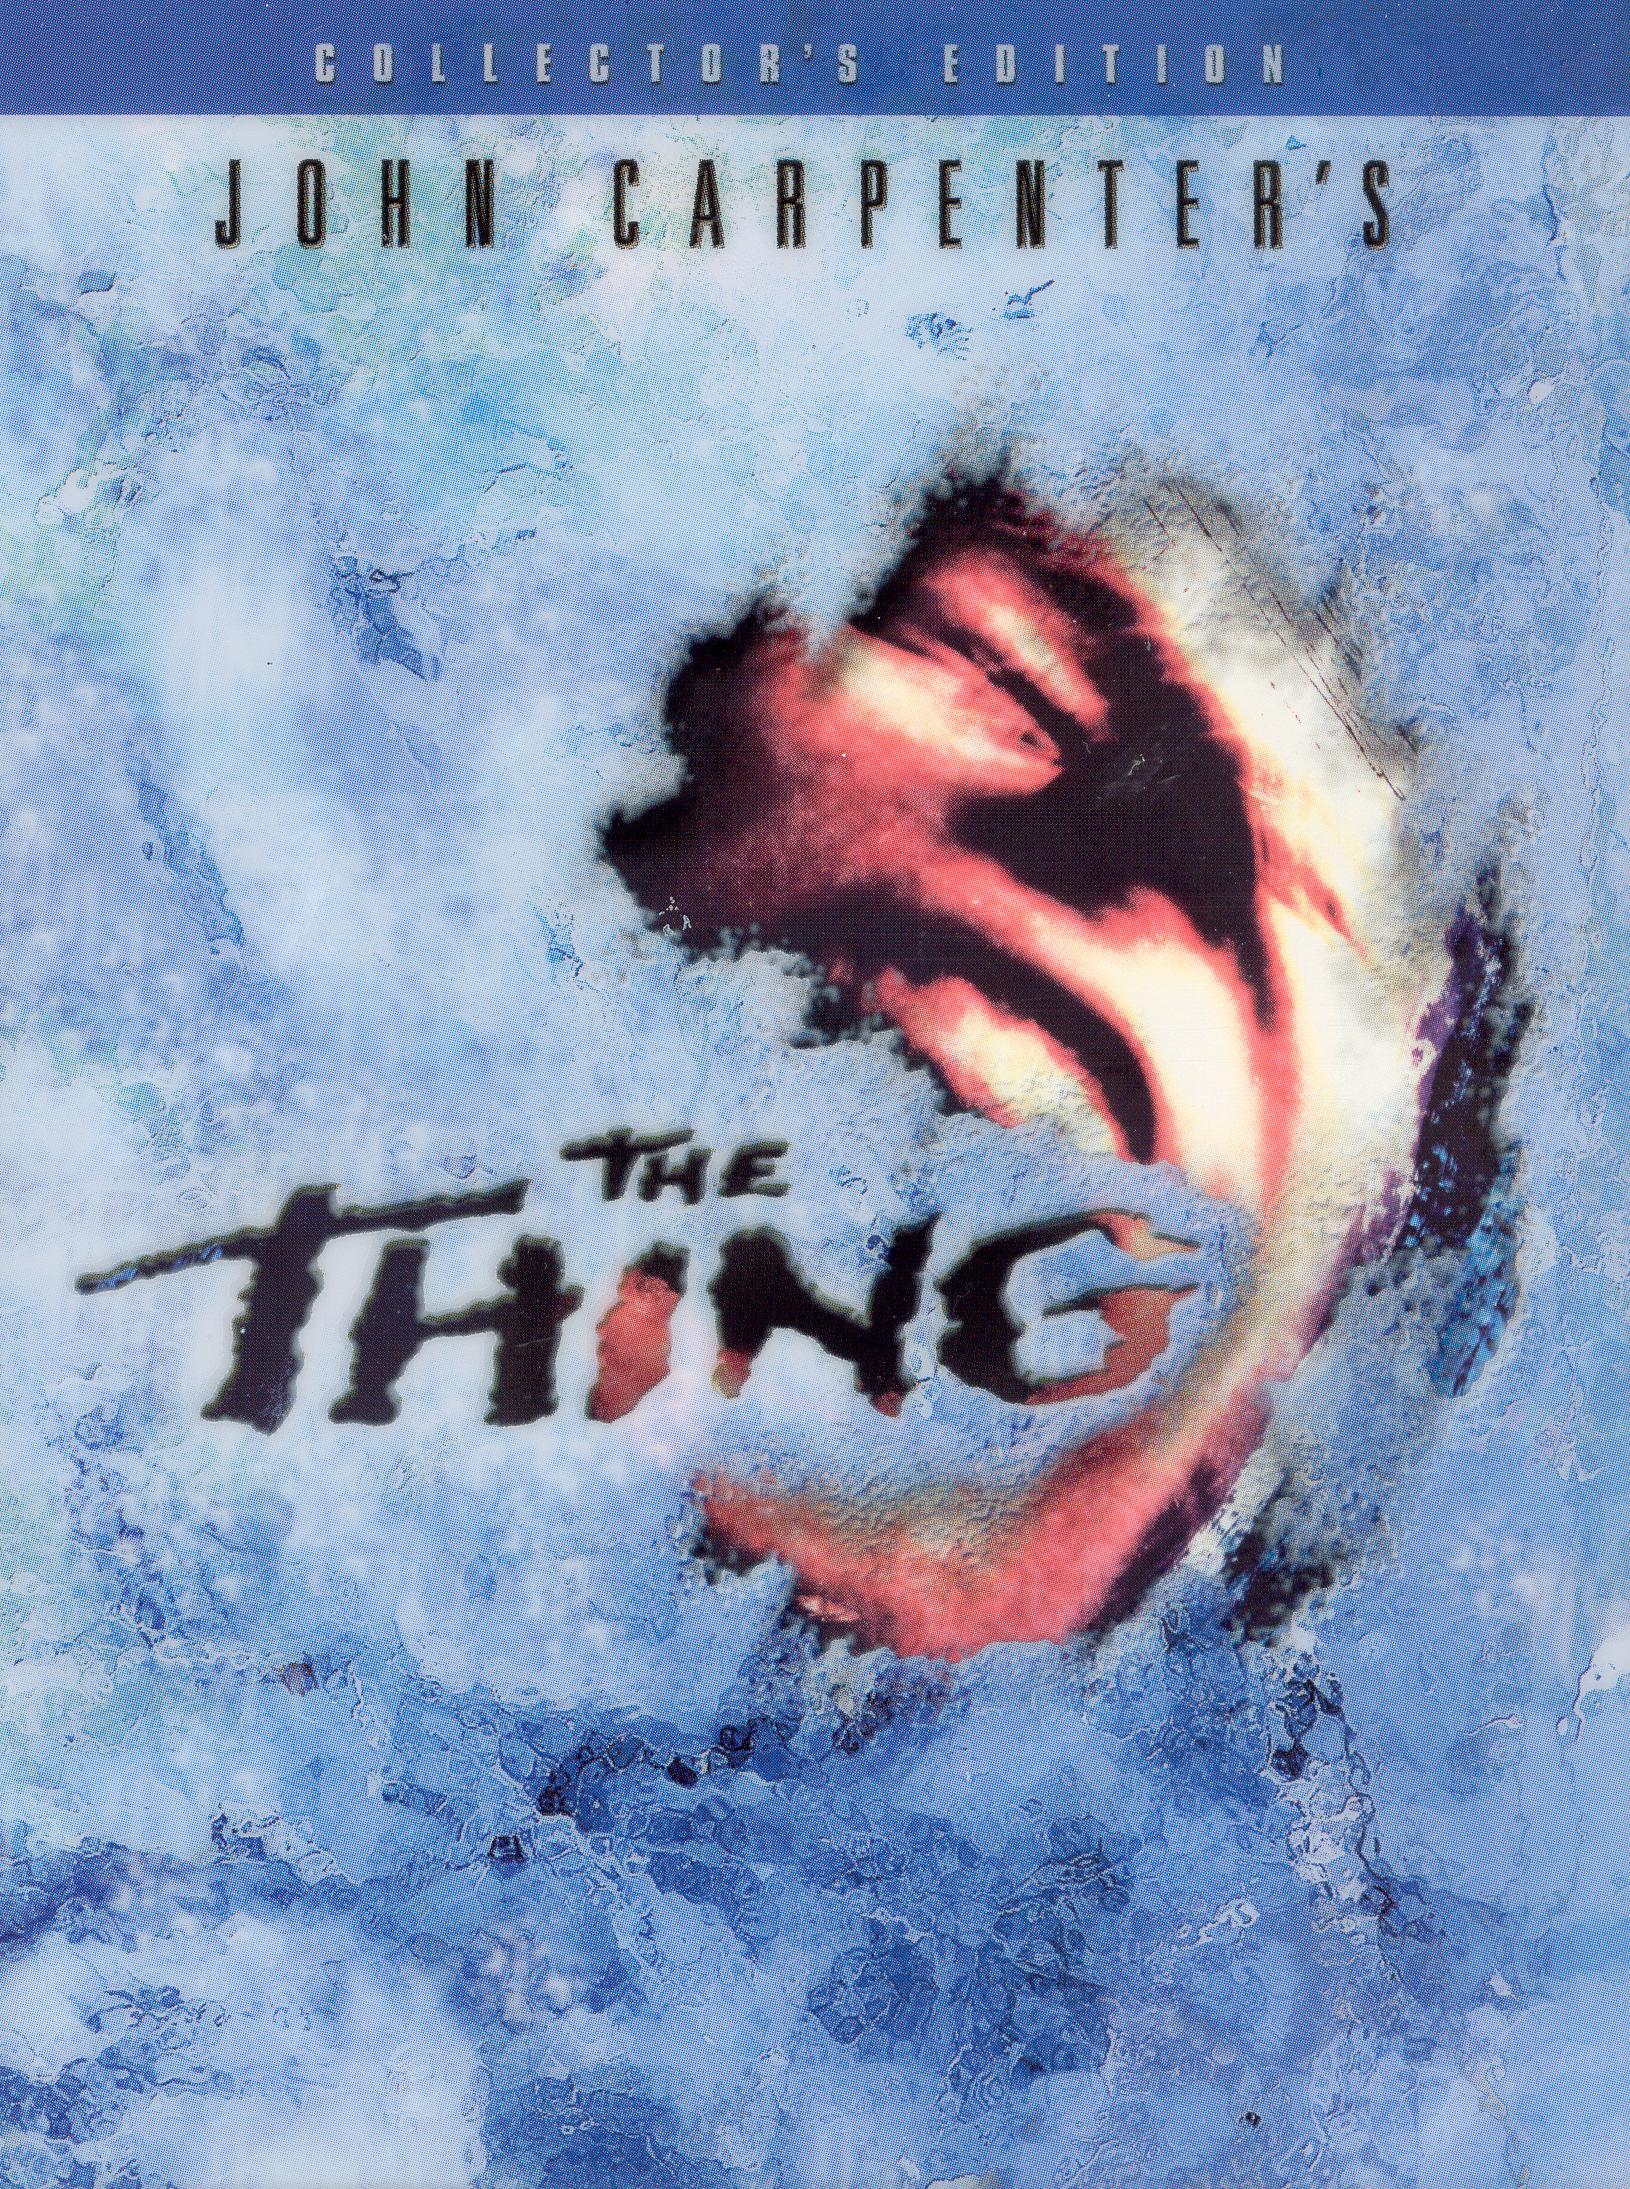 Thing [Collector's Edition] cover art